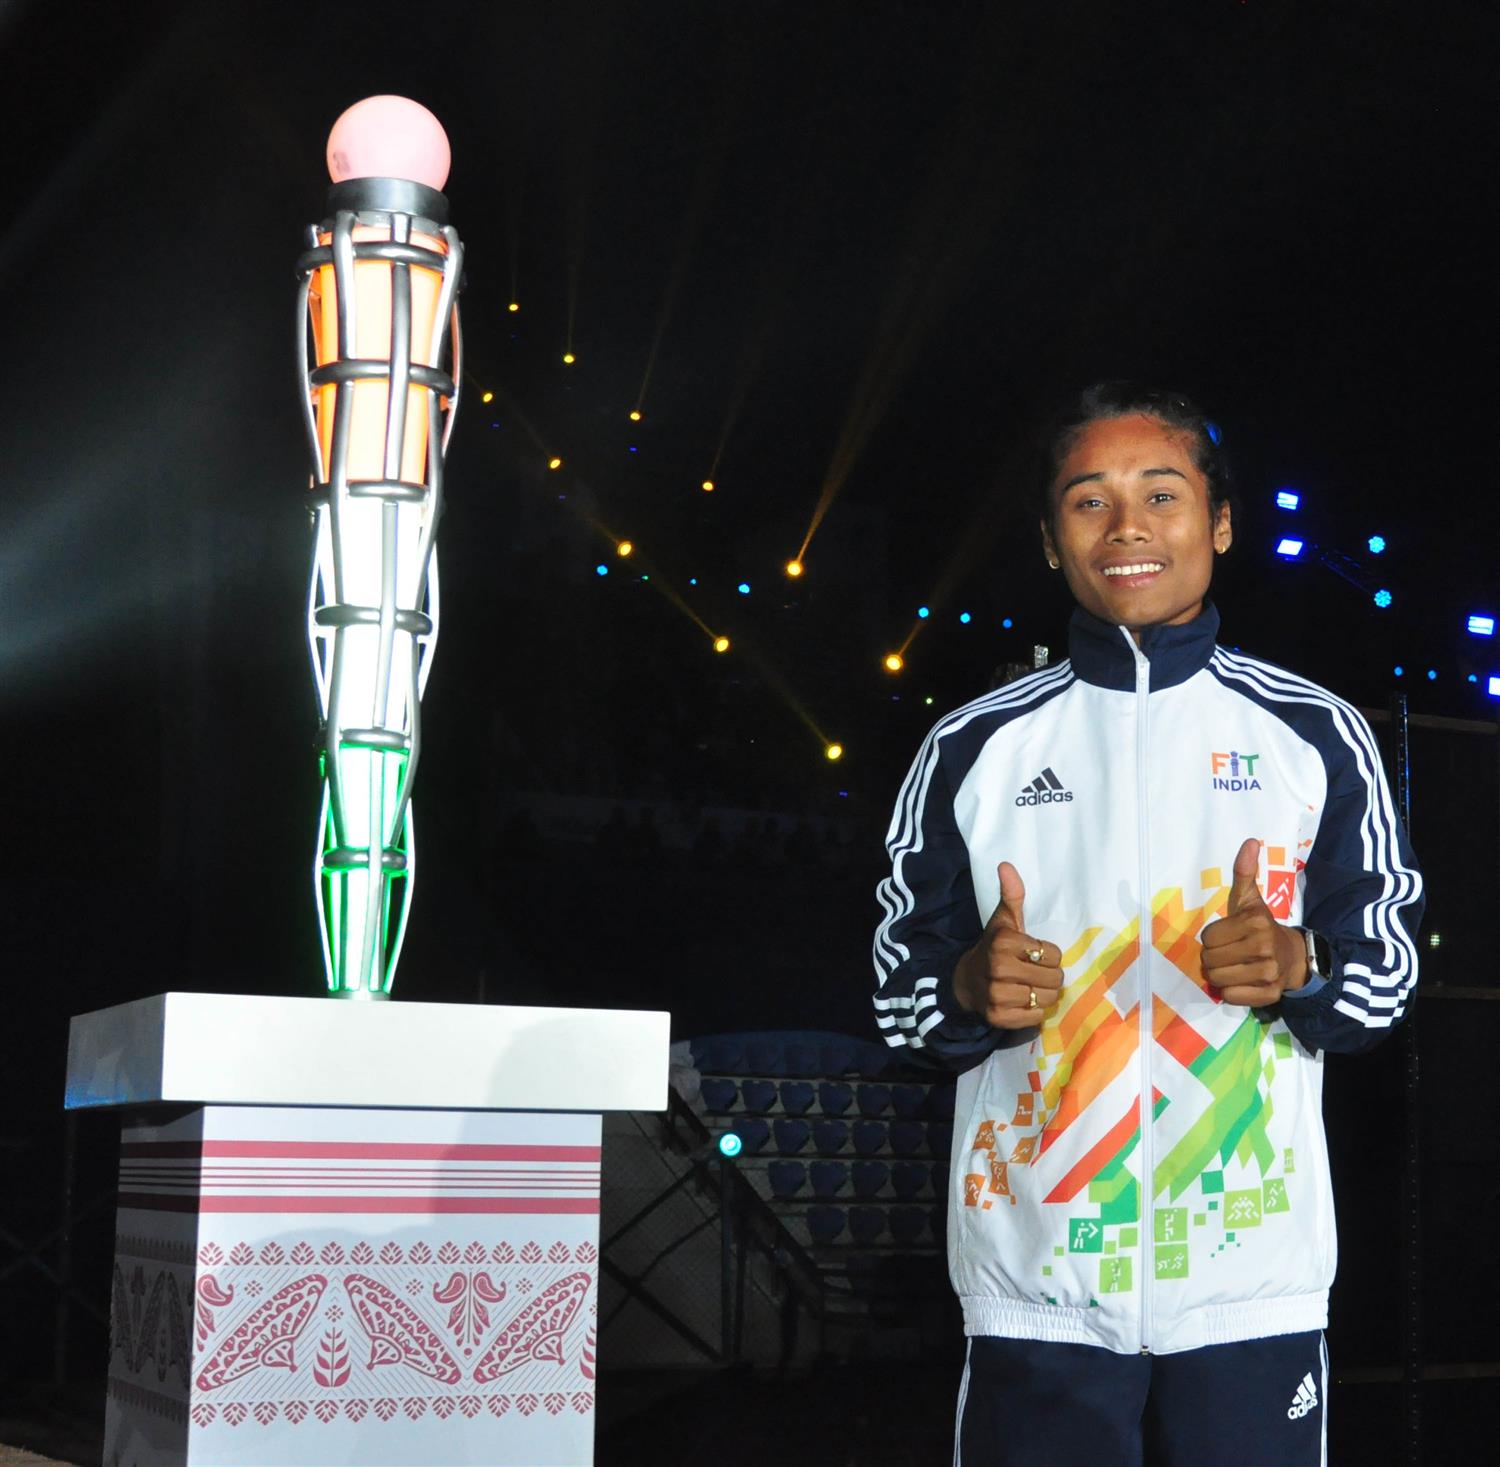 Hima Das and other athletes during the torch relay ceremony of third edition of Khelo India Youth Games 2020 at Guwahati on 10th January 2020